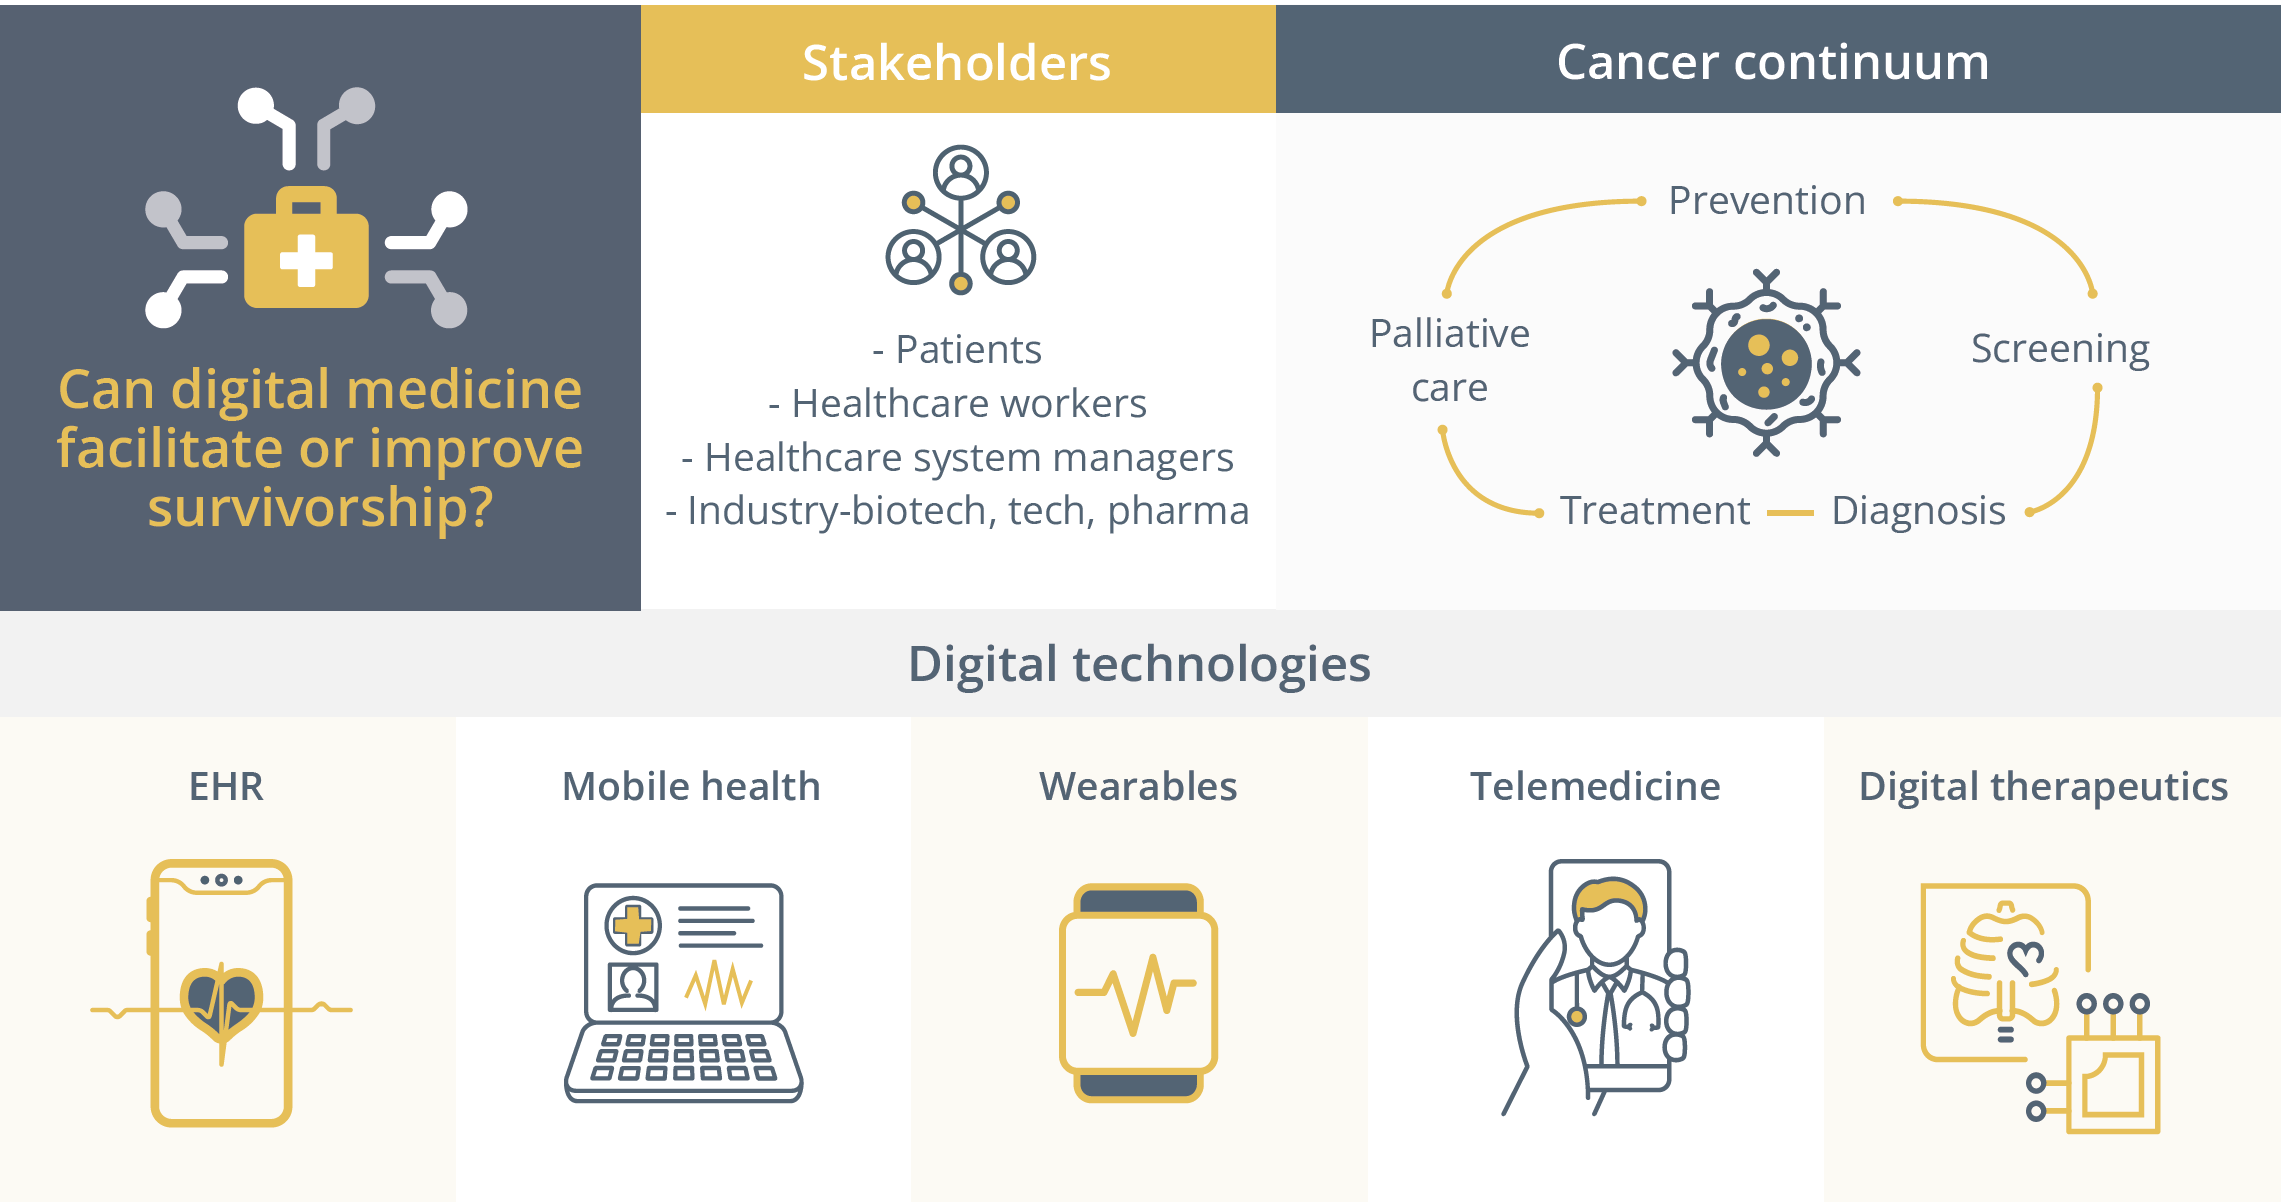 Digital medicine and its implications for stakeholders and the cancer continuum.